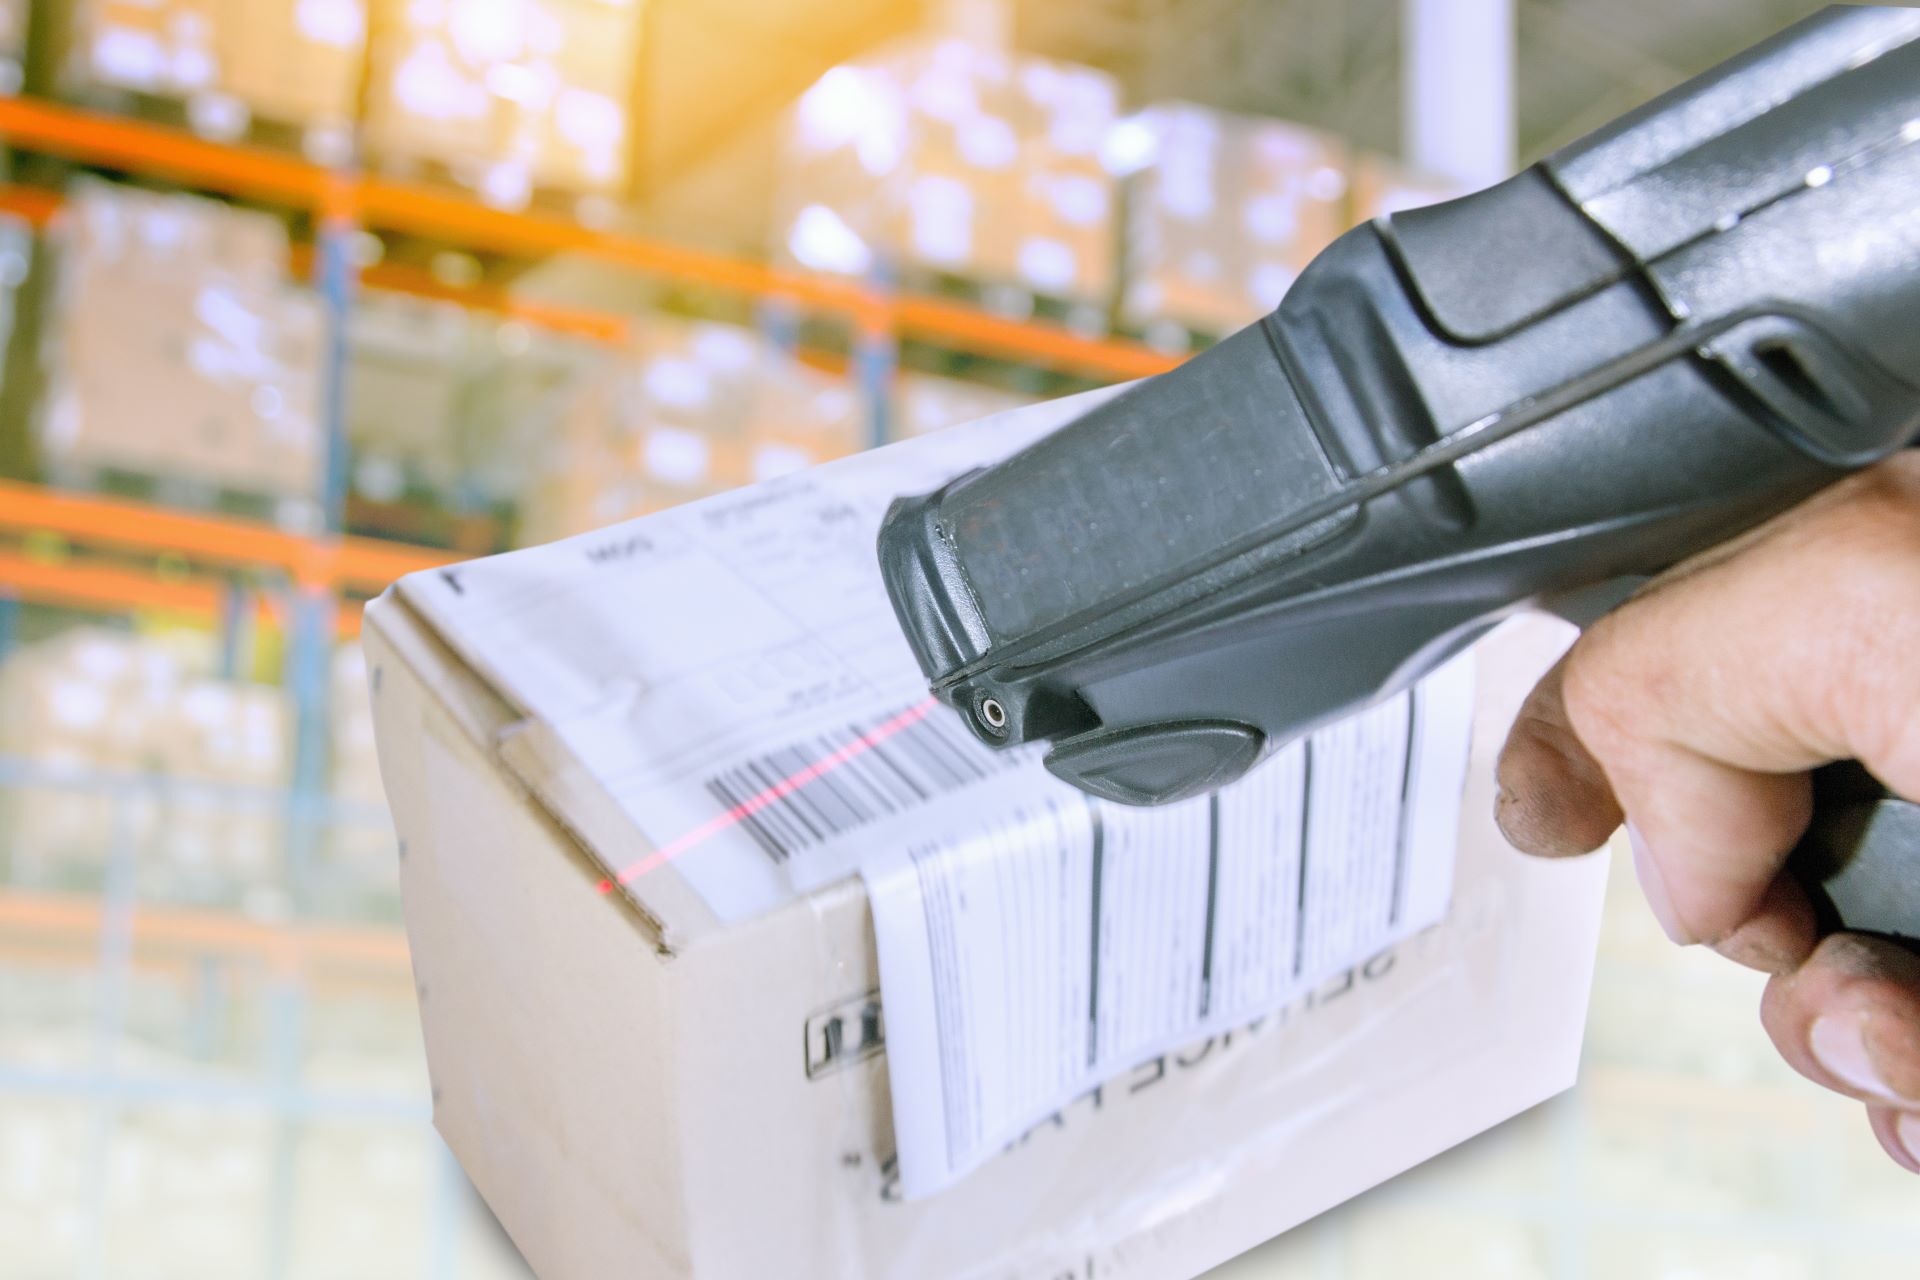 barcodes can simplify inventory management